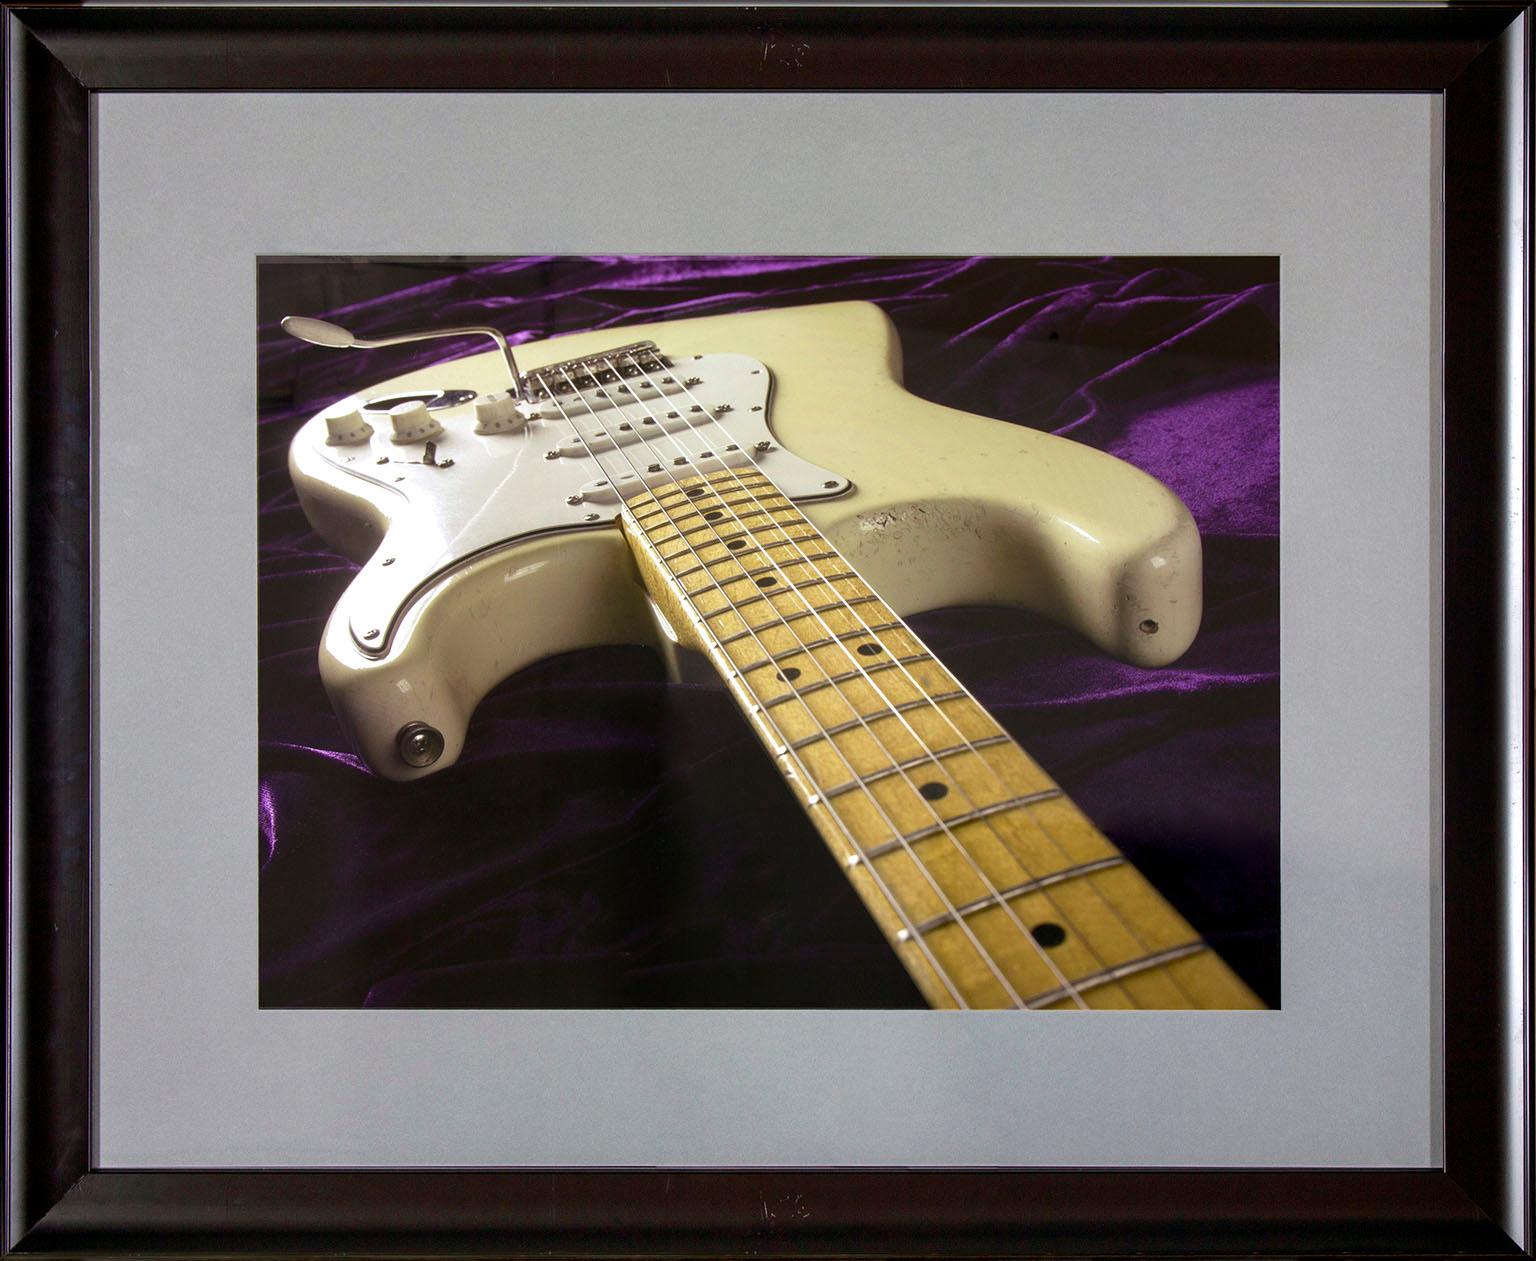 Original photo of "Jimi Hendrix at Woodstock" Jimi Hendrix guitar taken by Lisa S. Johnson for her book, "108 Rock Star Guitars." This framed photo was displayed in one of the guest rooms of the original Hard Rock Hotel and Casino in Las Vegas,